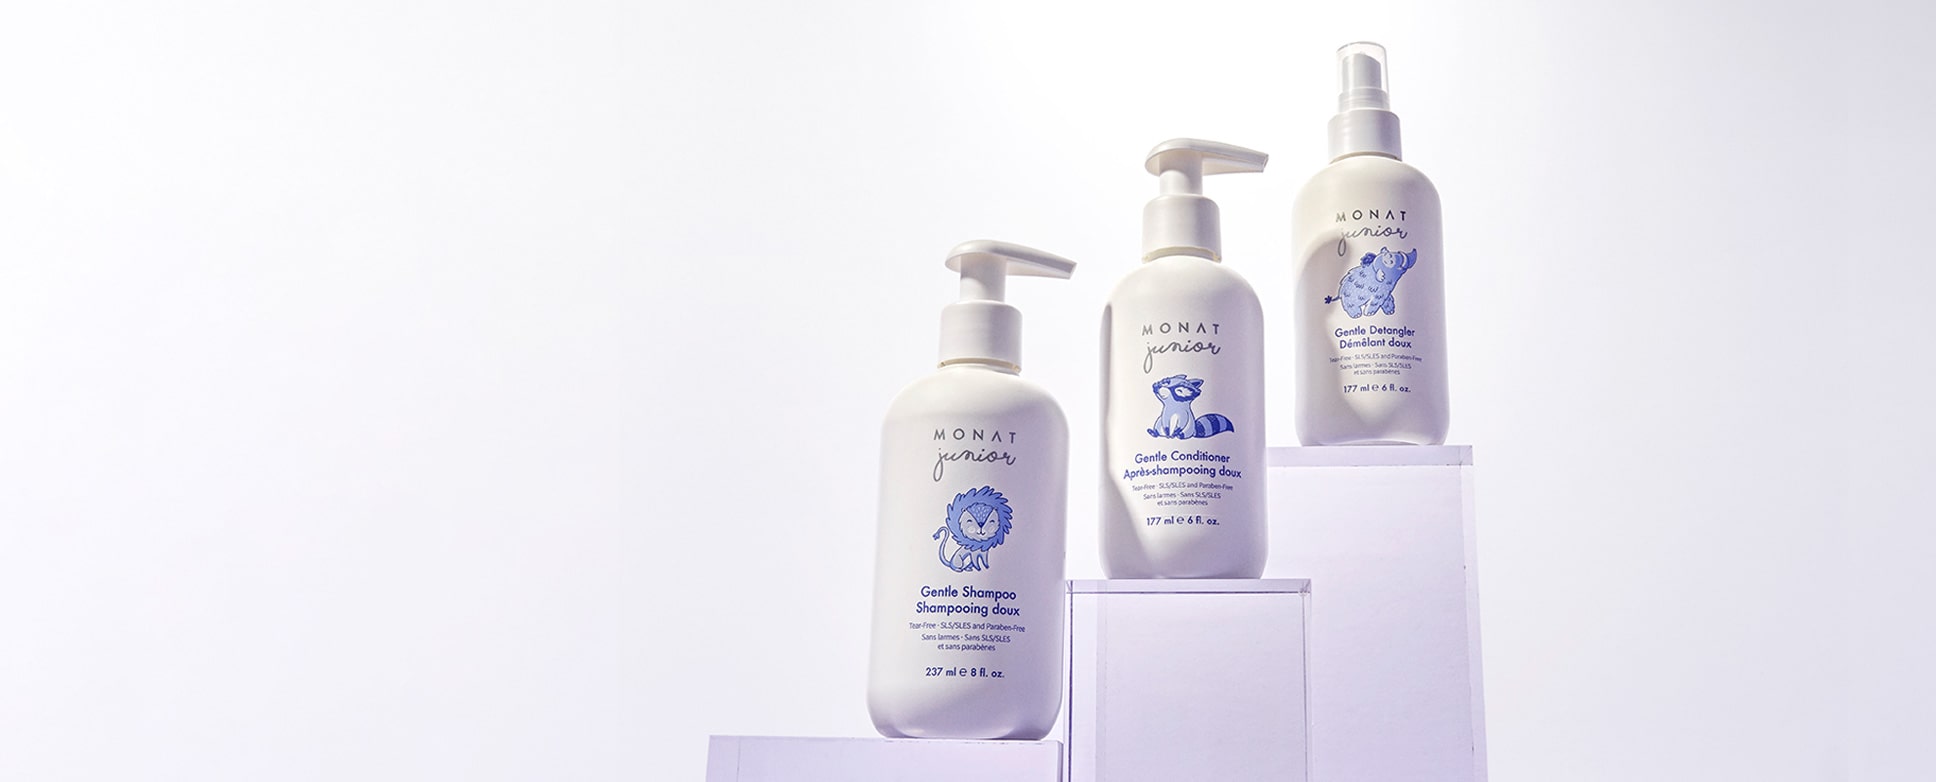  MONAT Junior products standing on clear stands.  